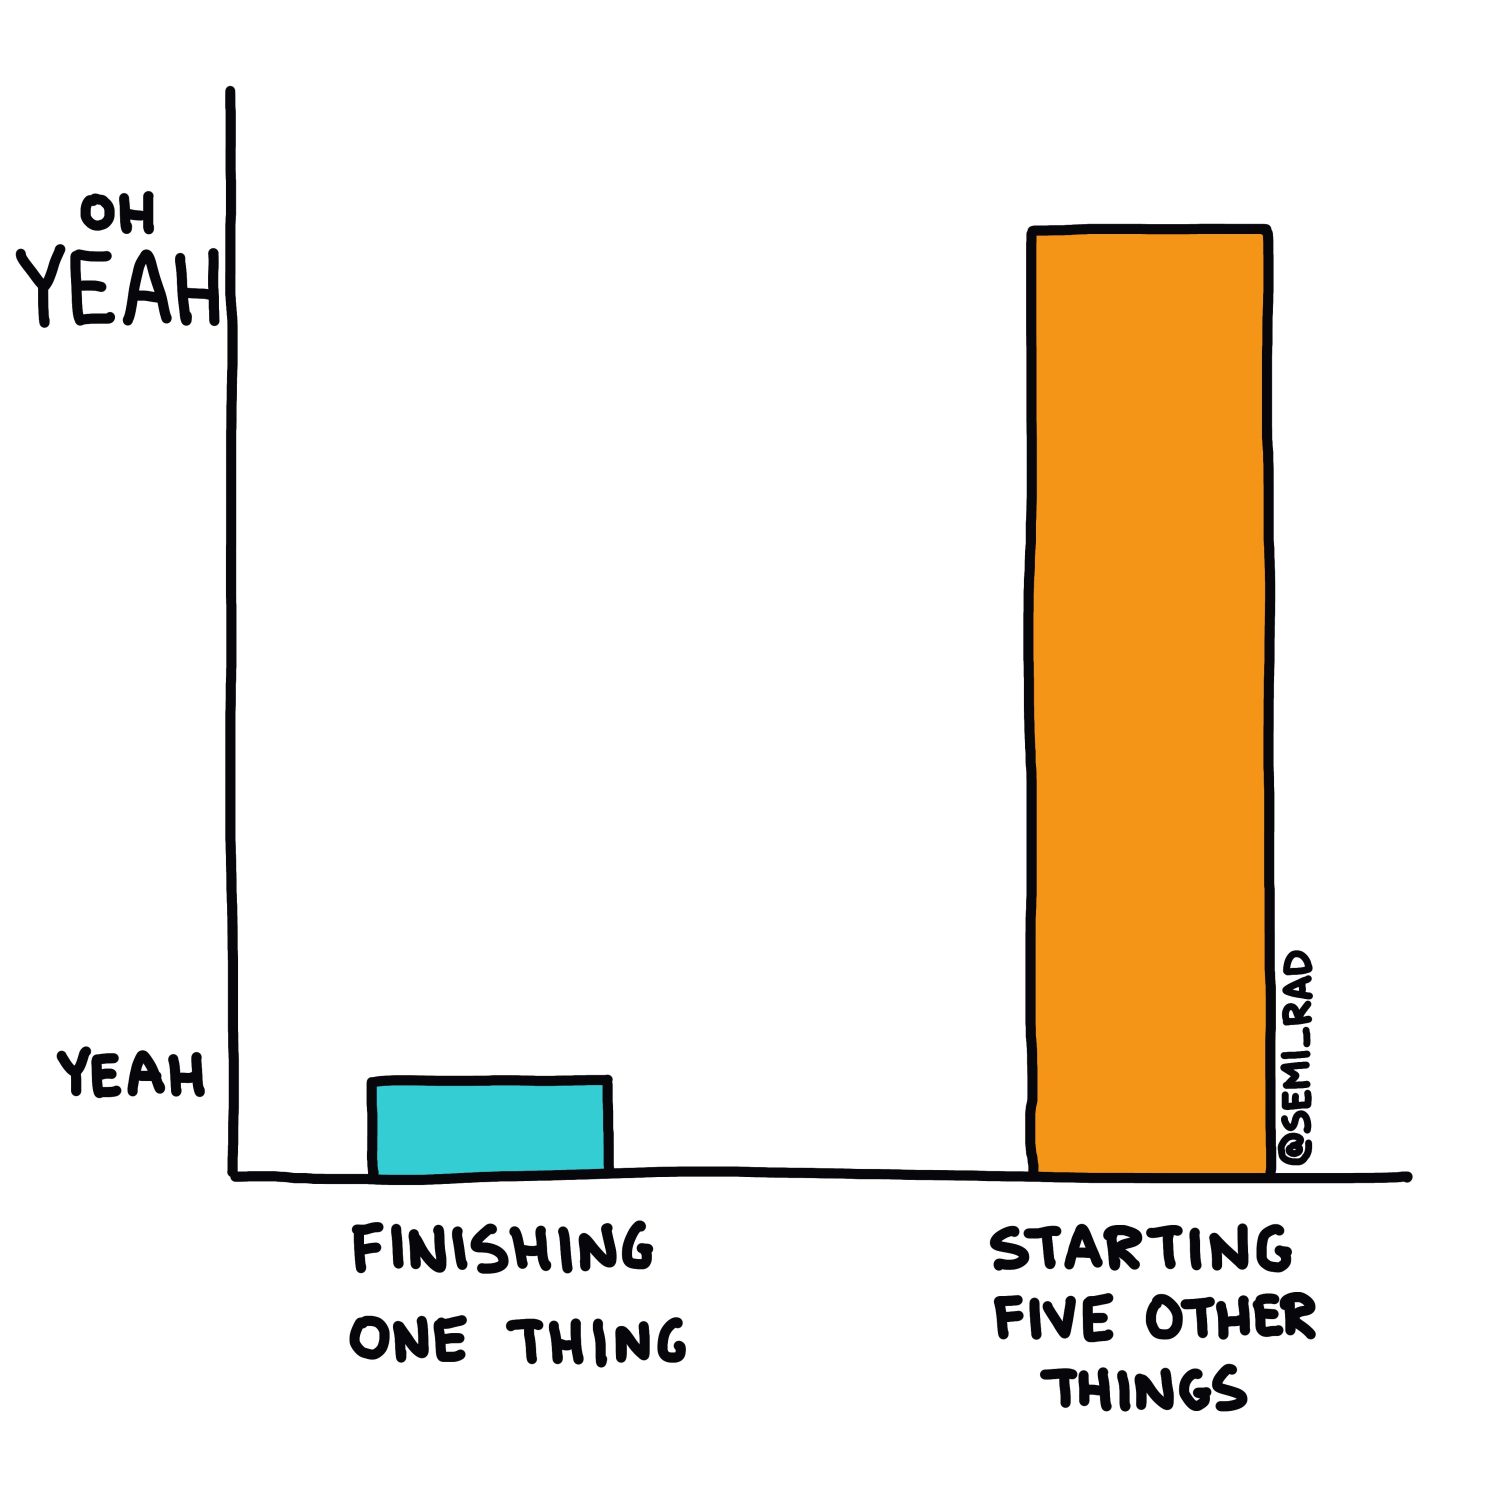  semi-rad chart: finishing one thing vs. starting five other things